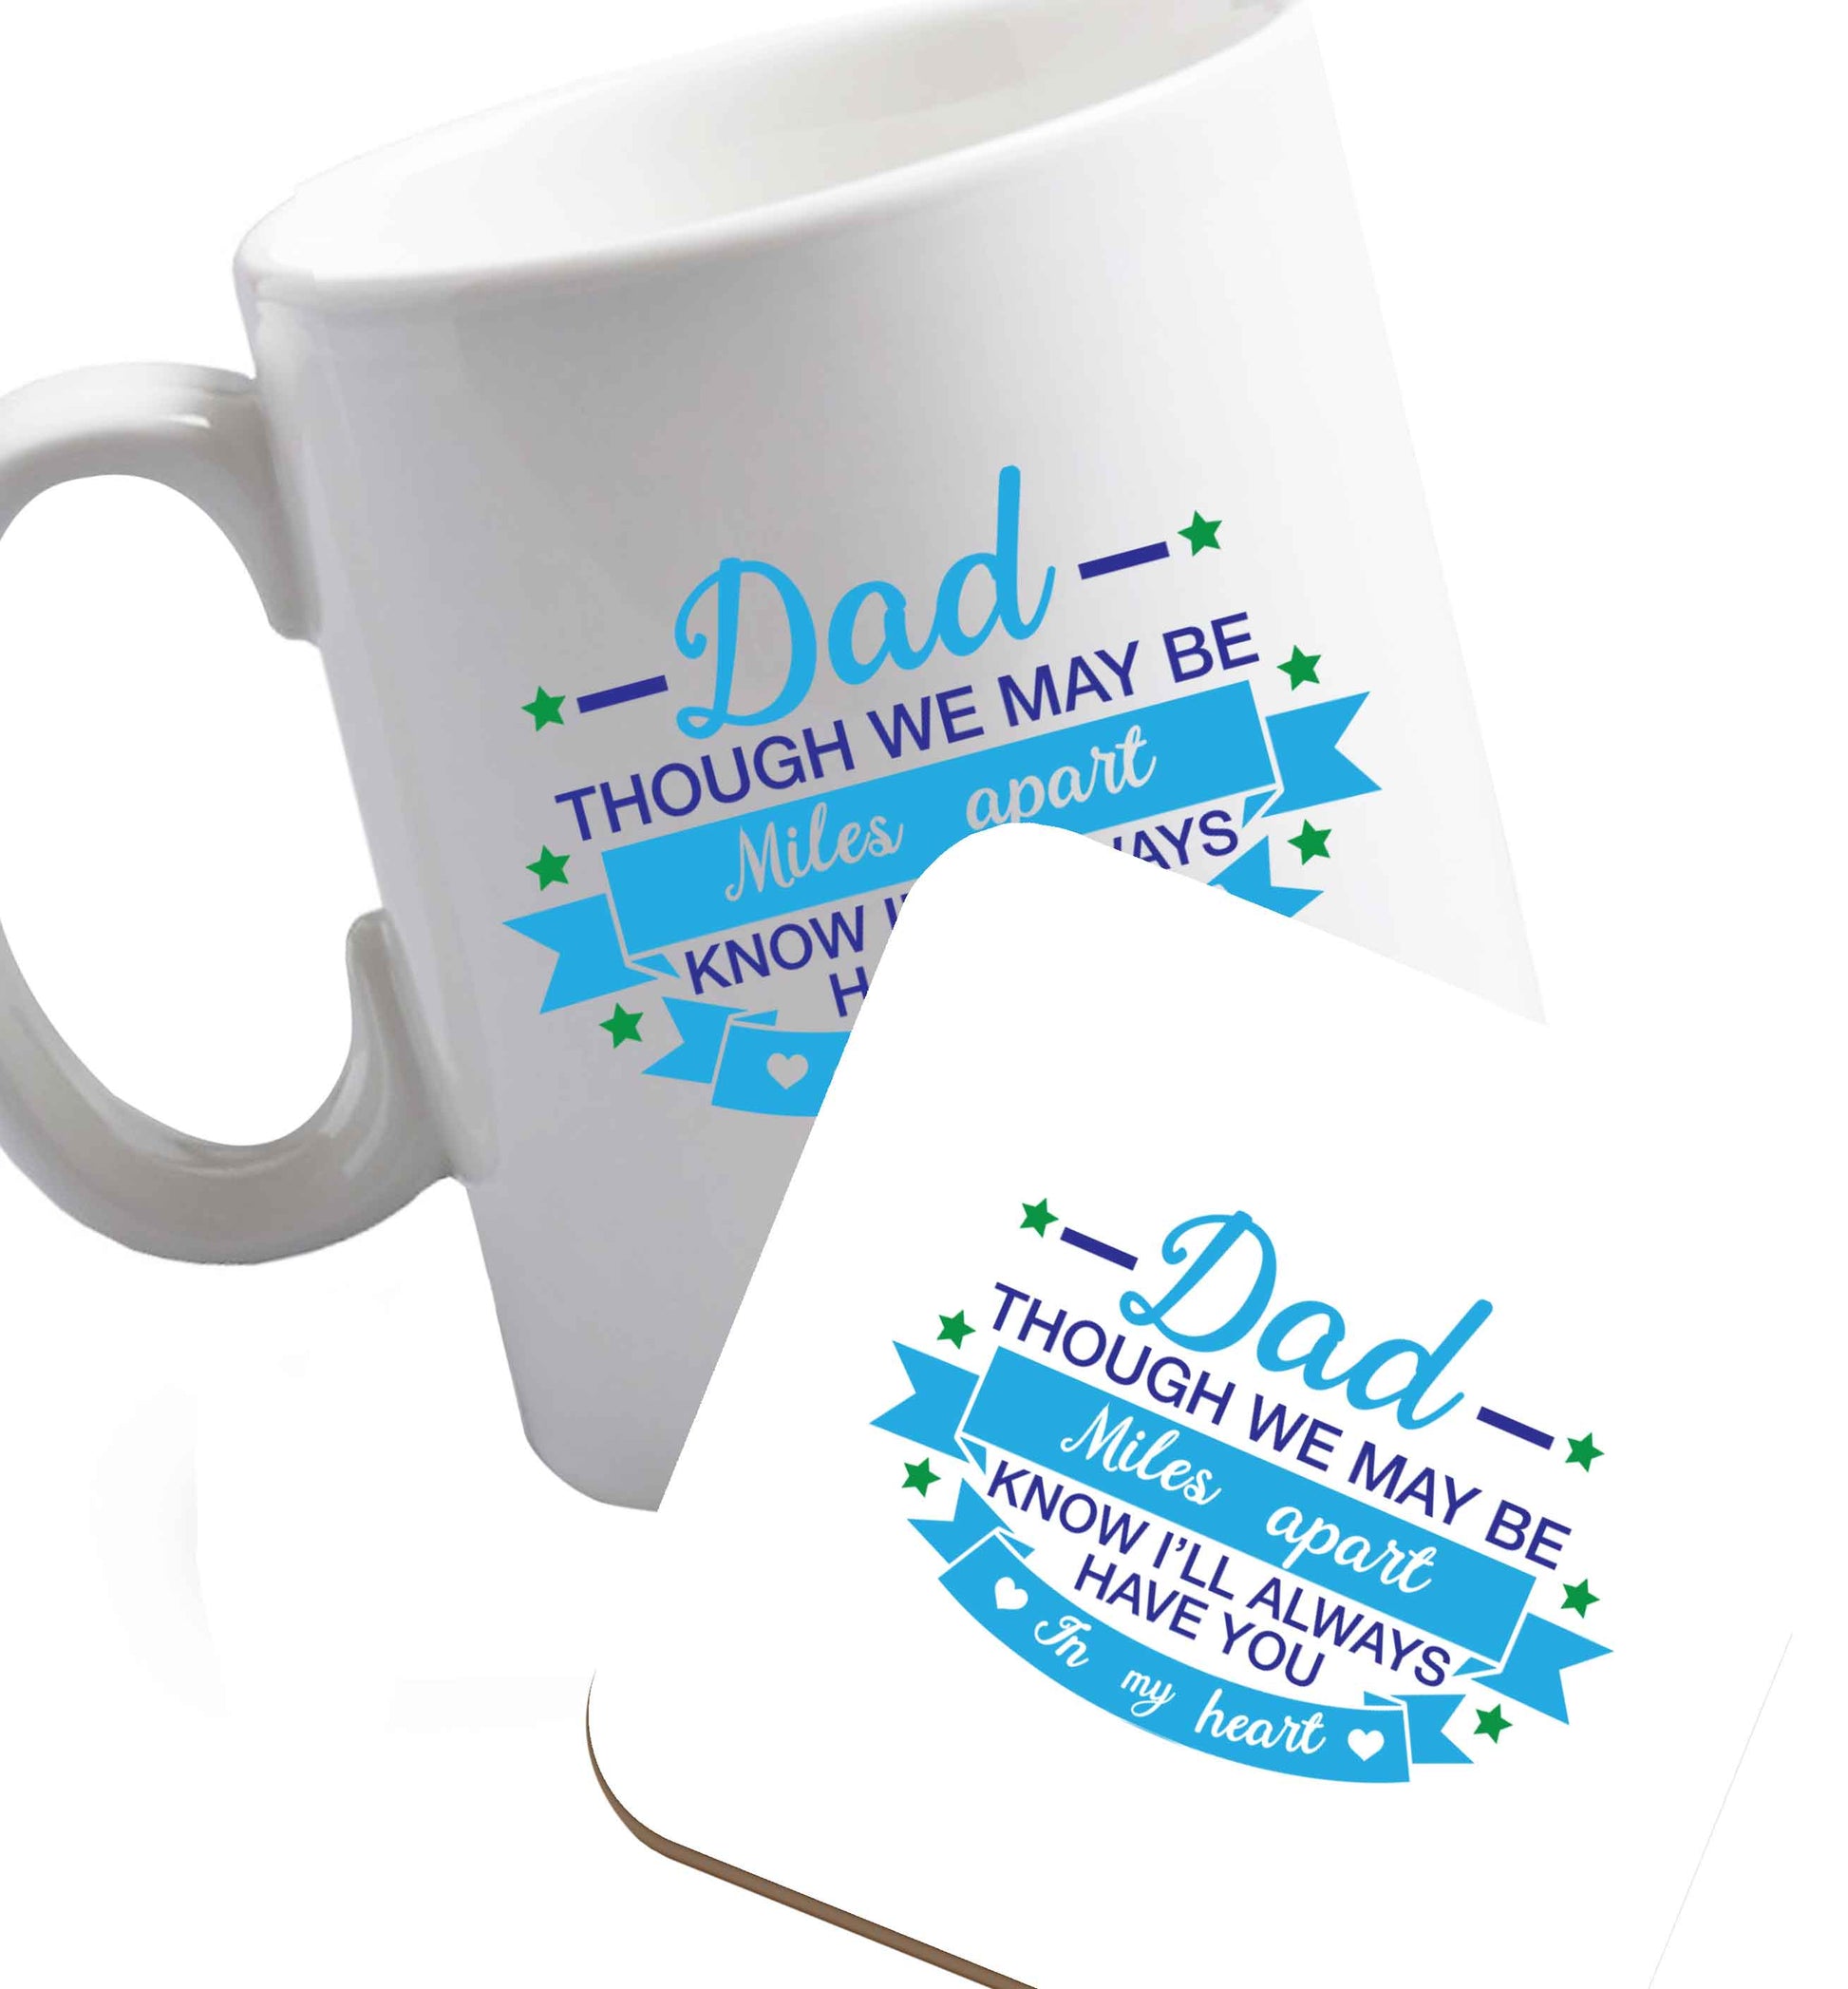 10 oz Dad though we are miles apart know I'll always have you in my heart ceramic mug and coaster set right handed